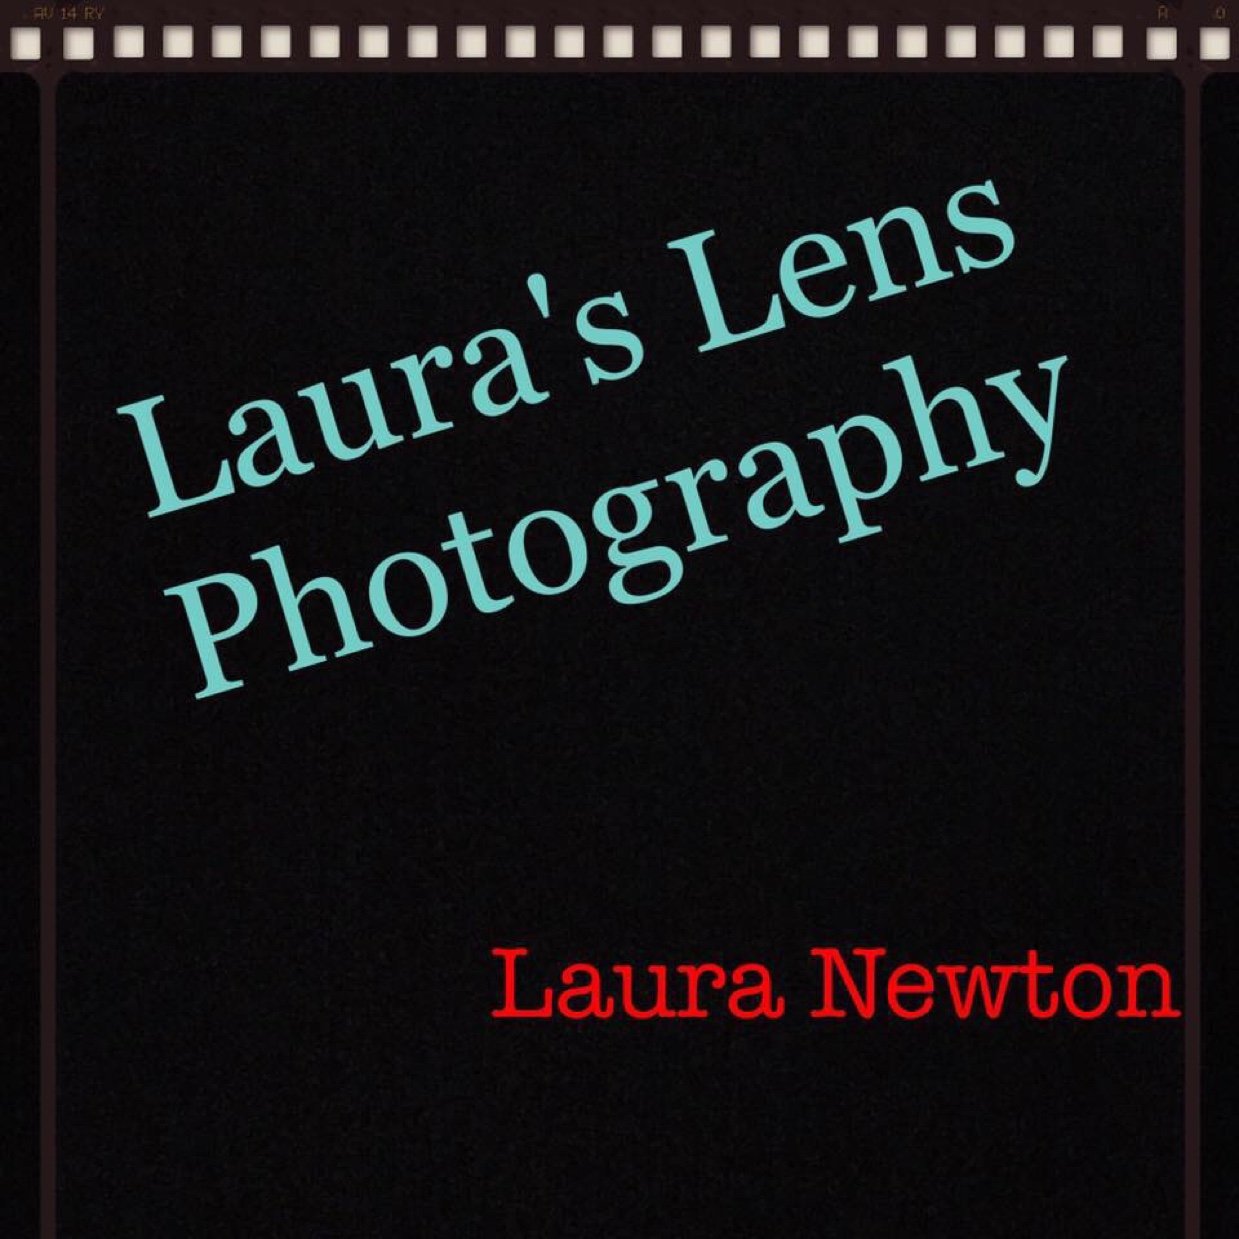 Laura's Lens Photography